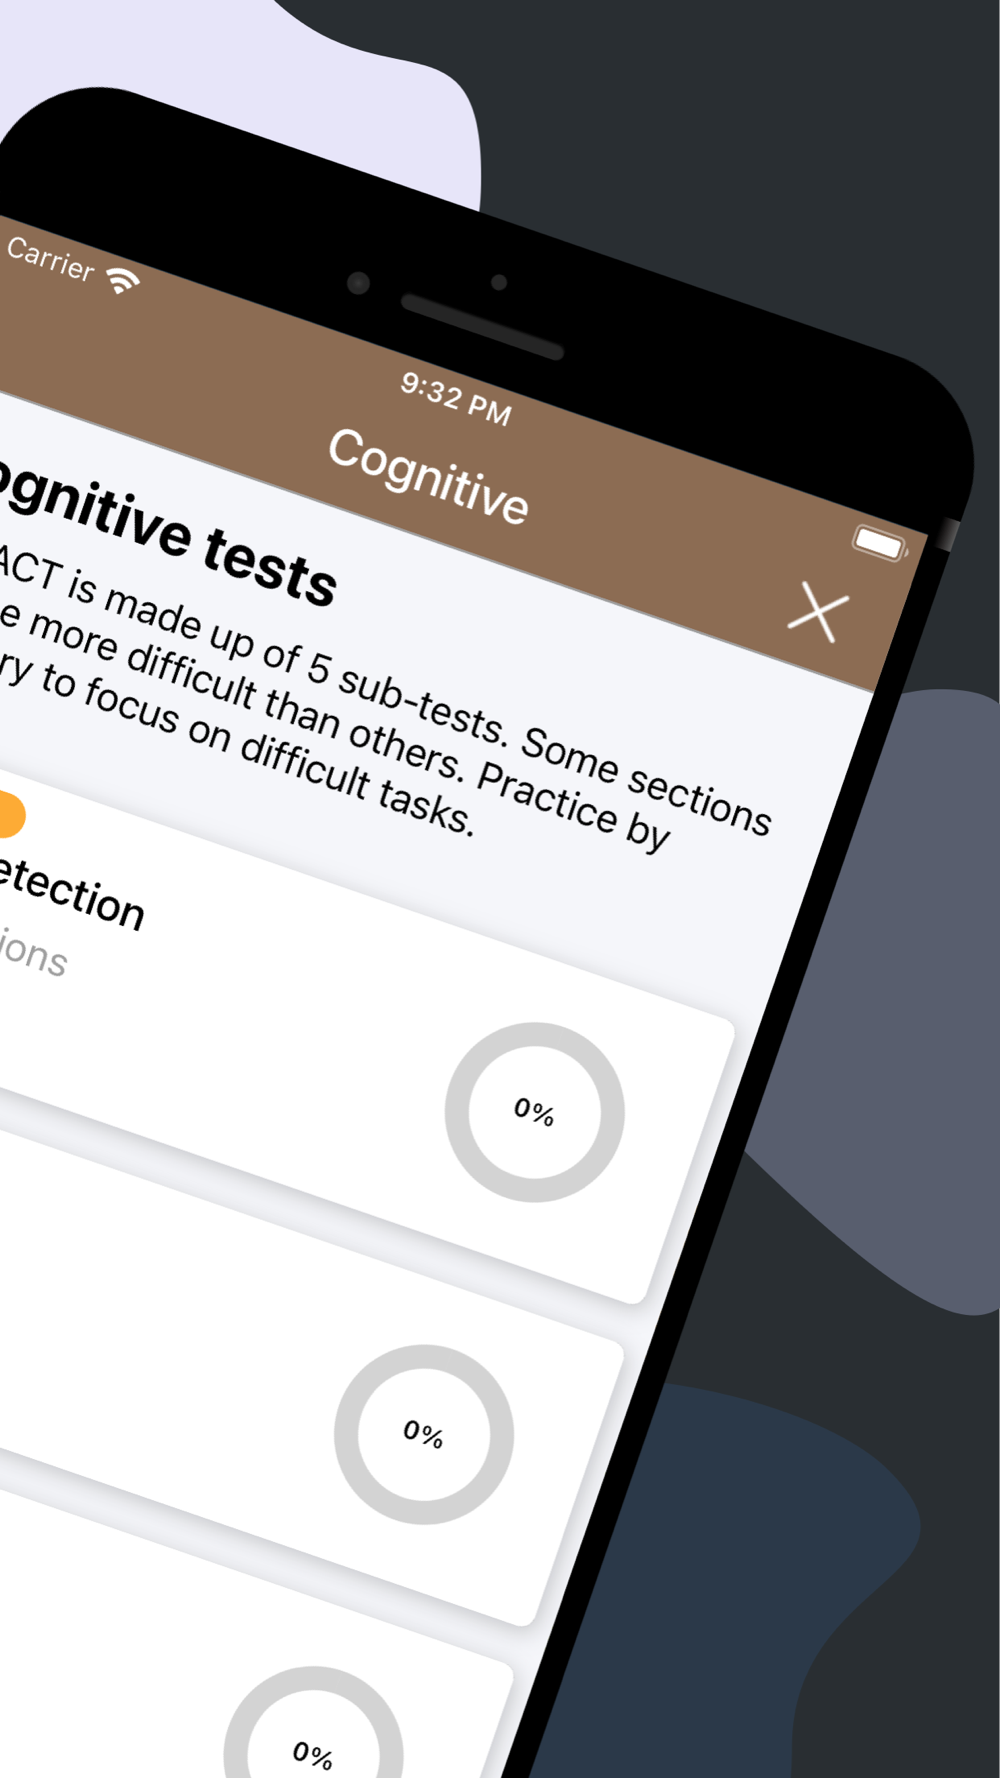 British Army Cognitive Test Free Download App For IPhone STEPrimo